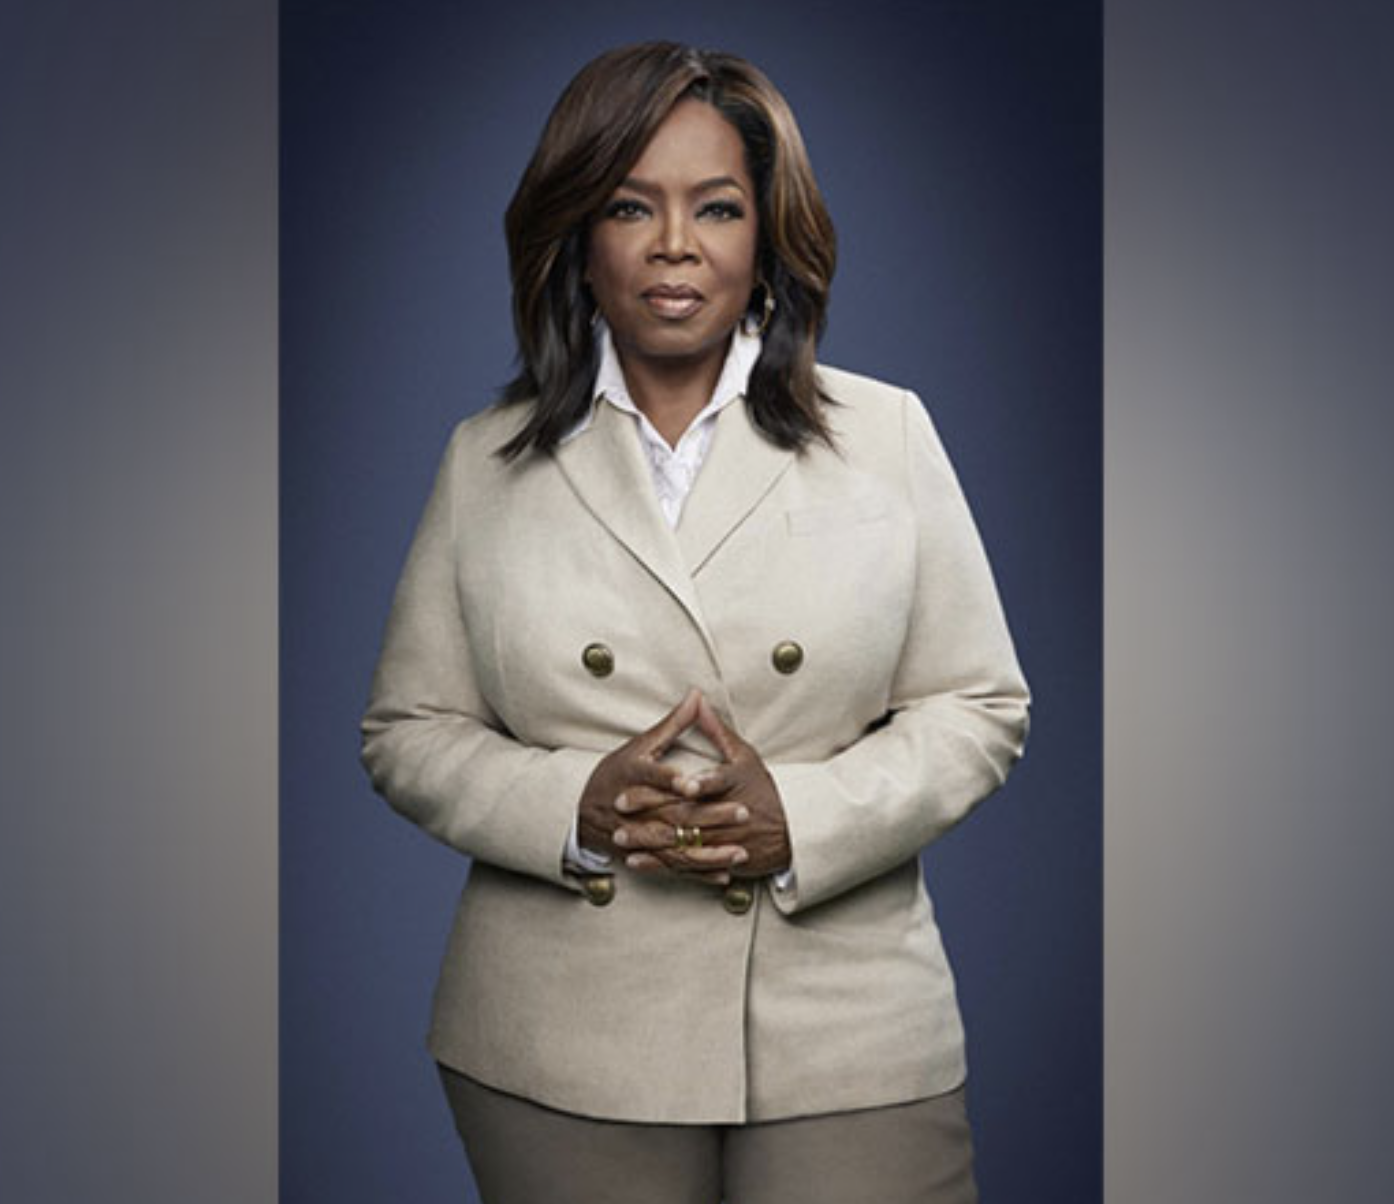 quoti-should-be-shamedquot-oprah-winfrey-recalls-how-she-felt-after-joan-rivers-comments-about-her-weight